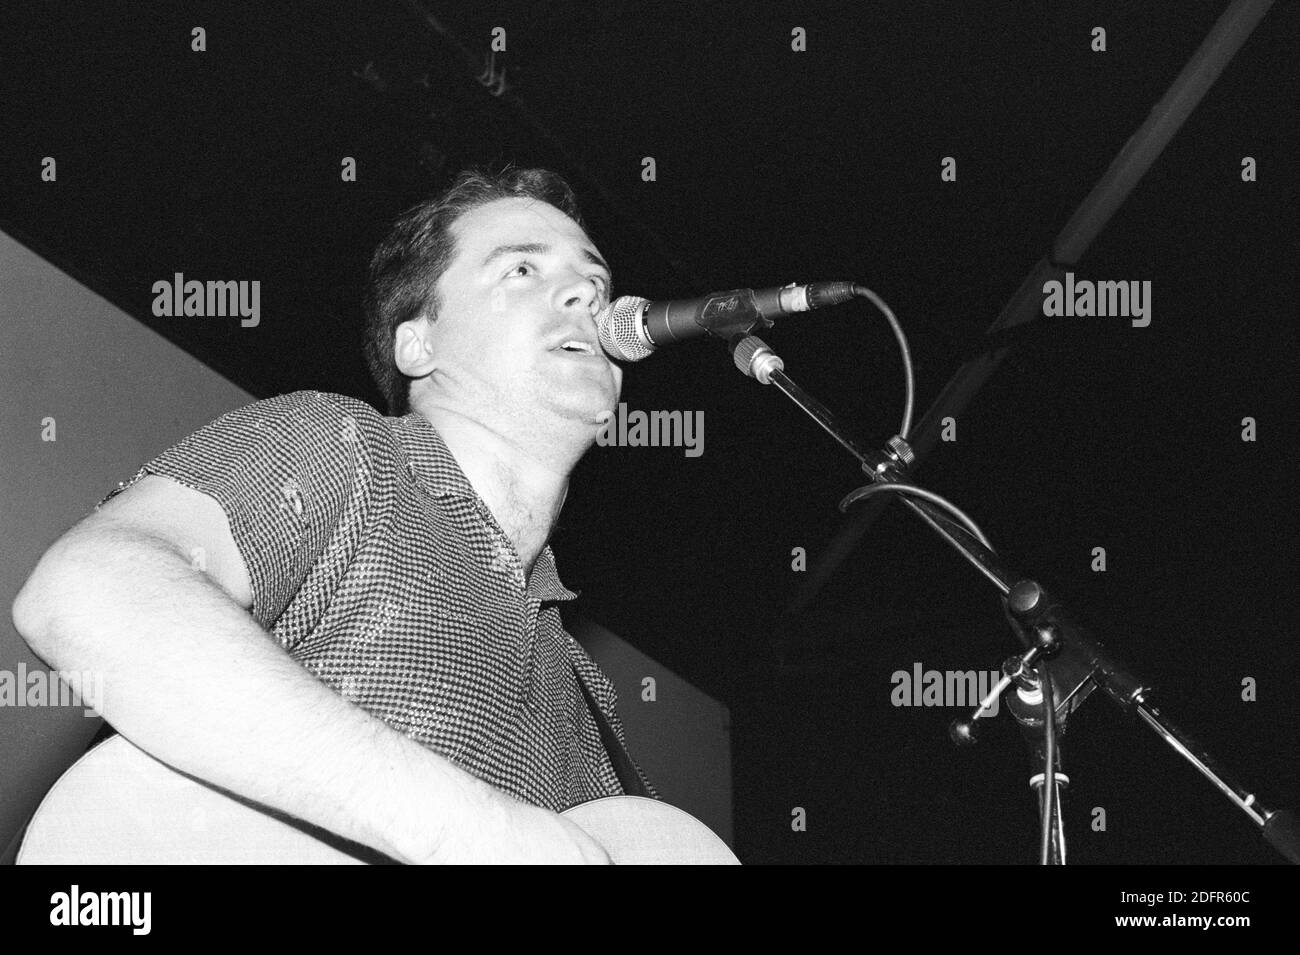 Martin Phillips and The Chills performing at the Bowen West Theatre, Bedford, 3rd March 1990. Stock Photo